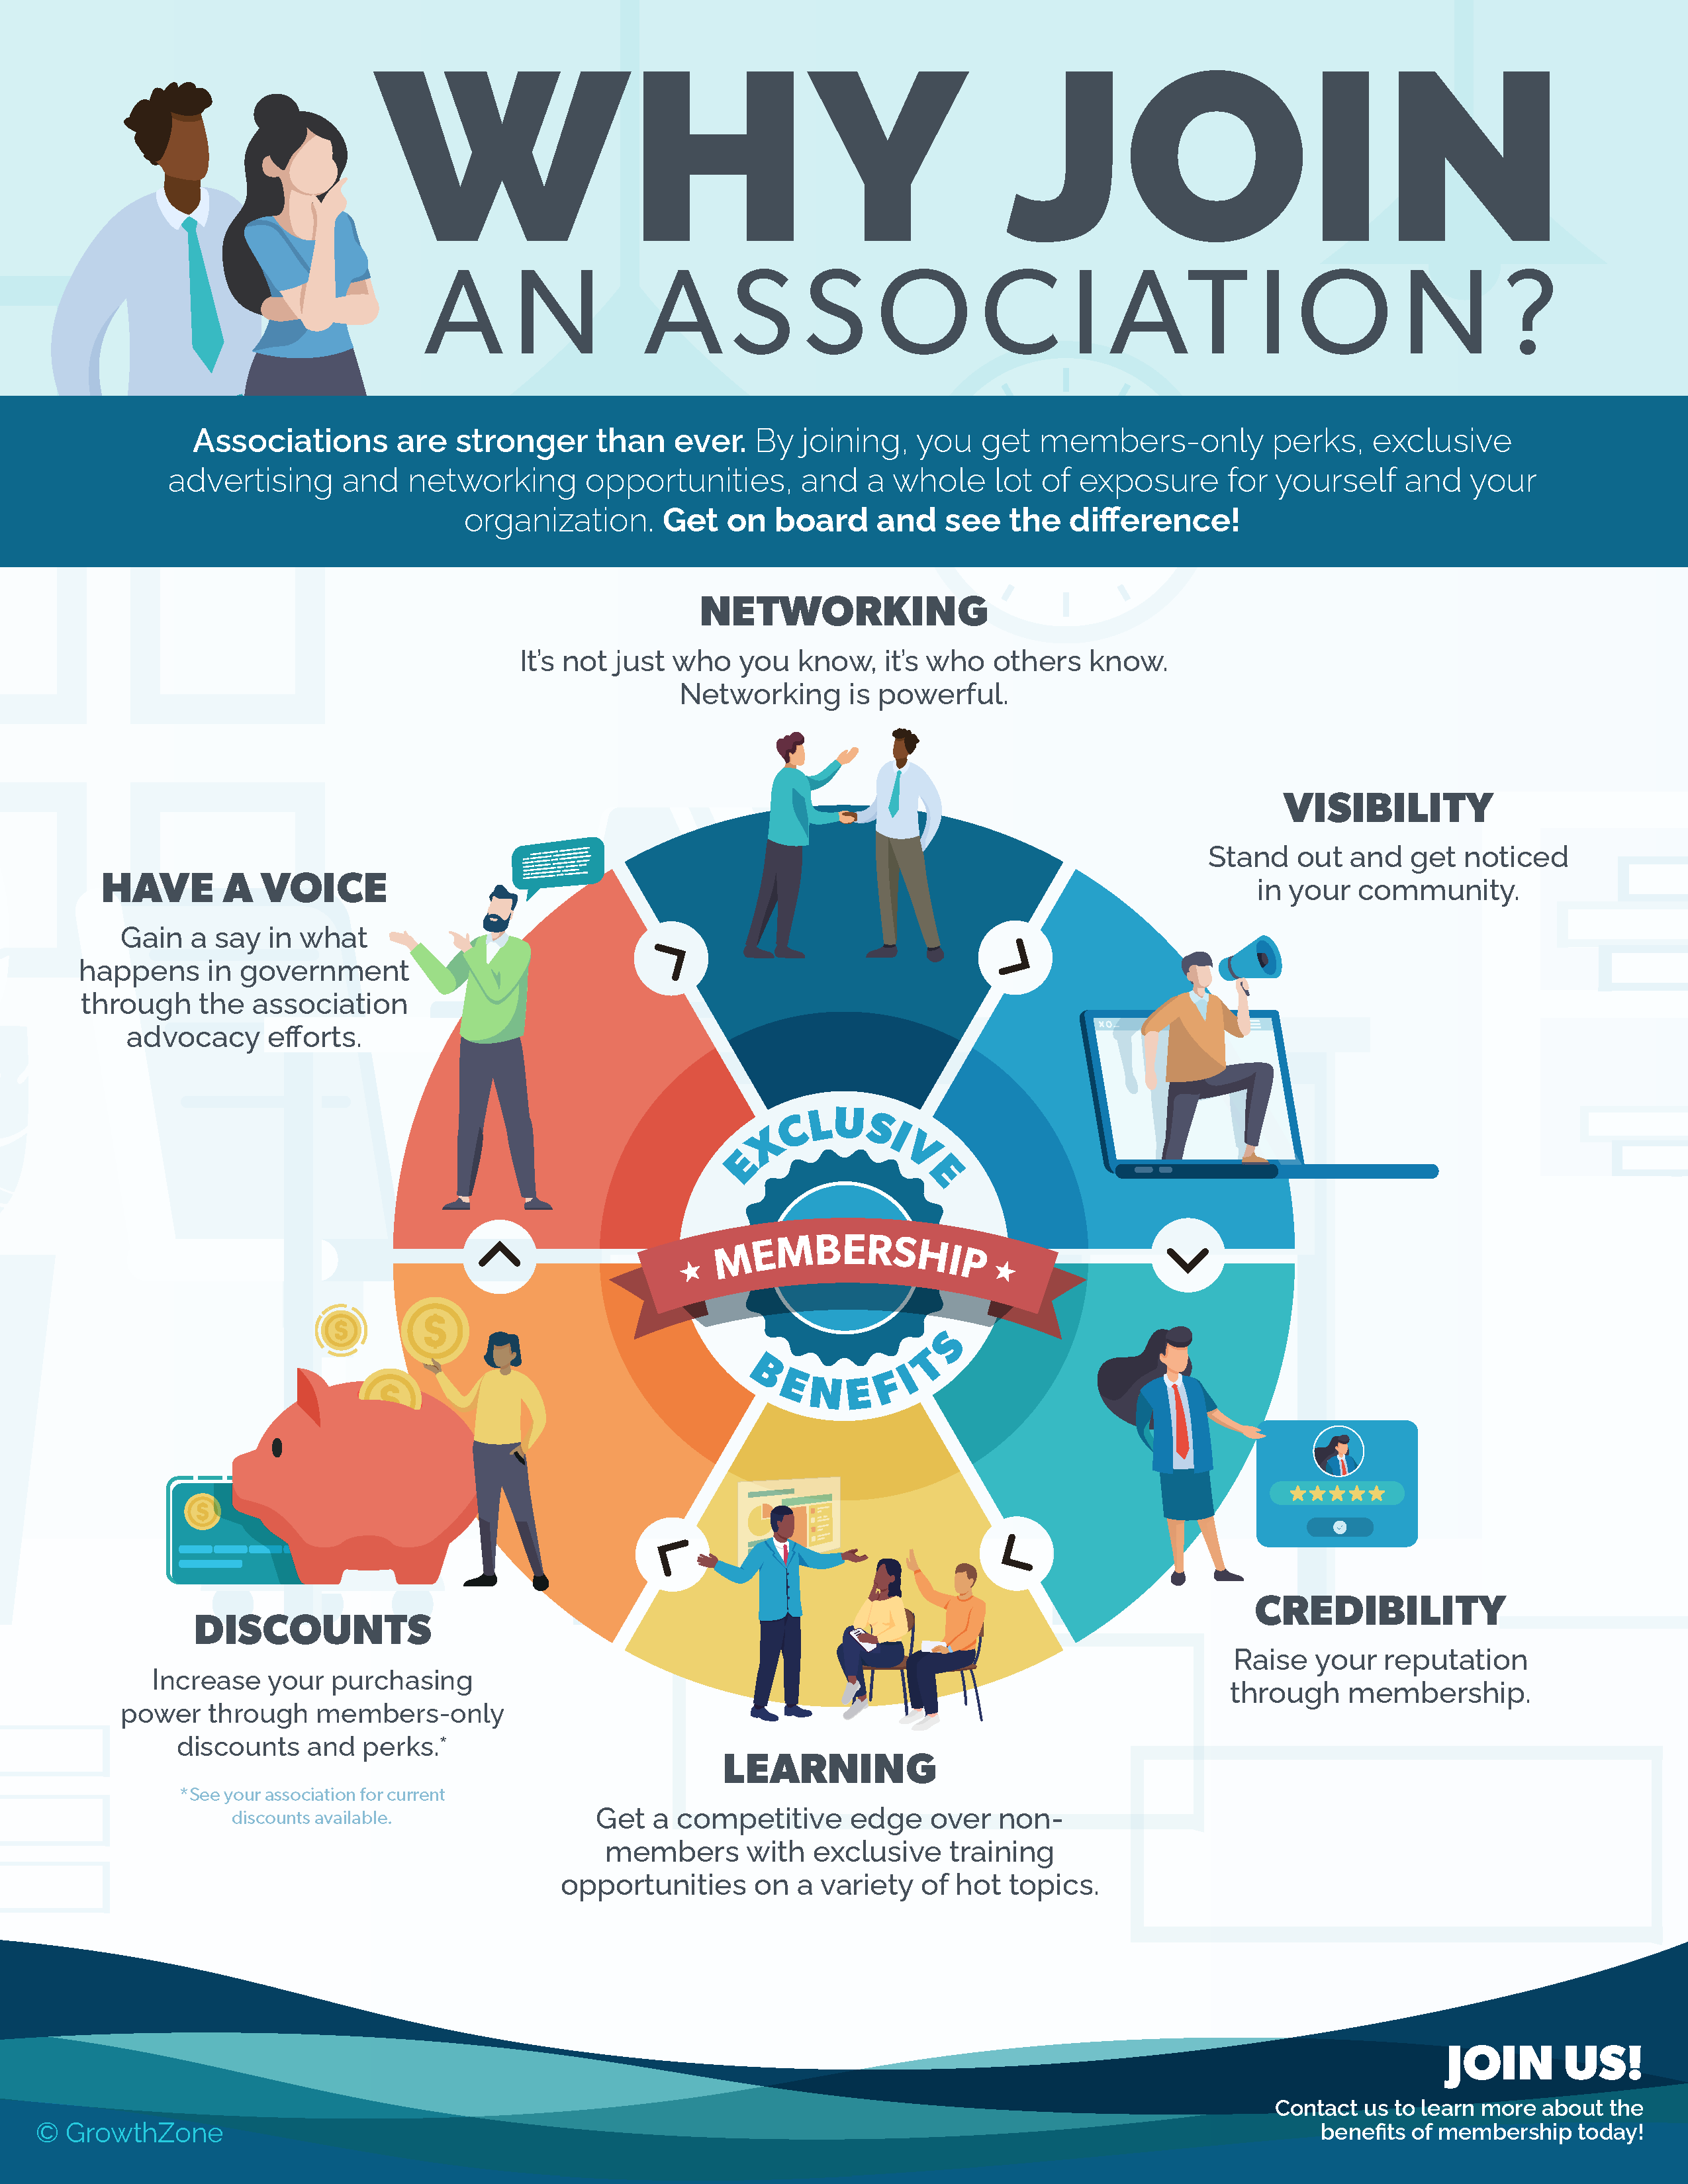 Why Join an Association